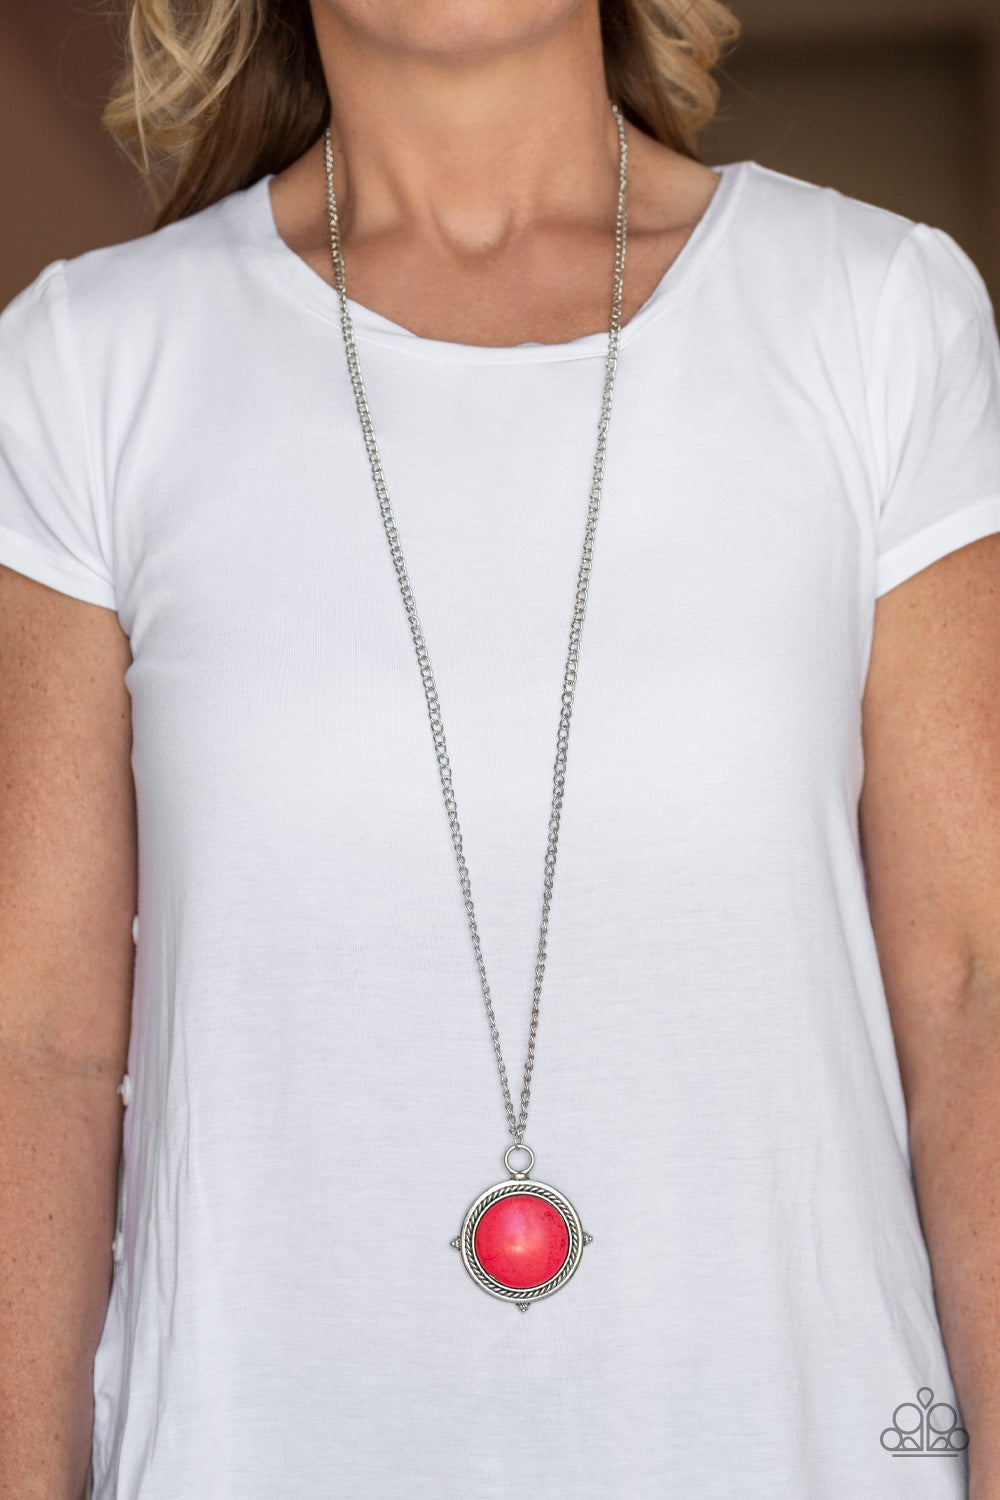 Paparazzi Desert Equinox Red Stone Long Necklace. Get Free Shipping!